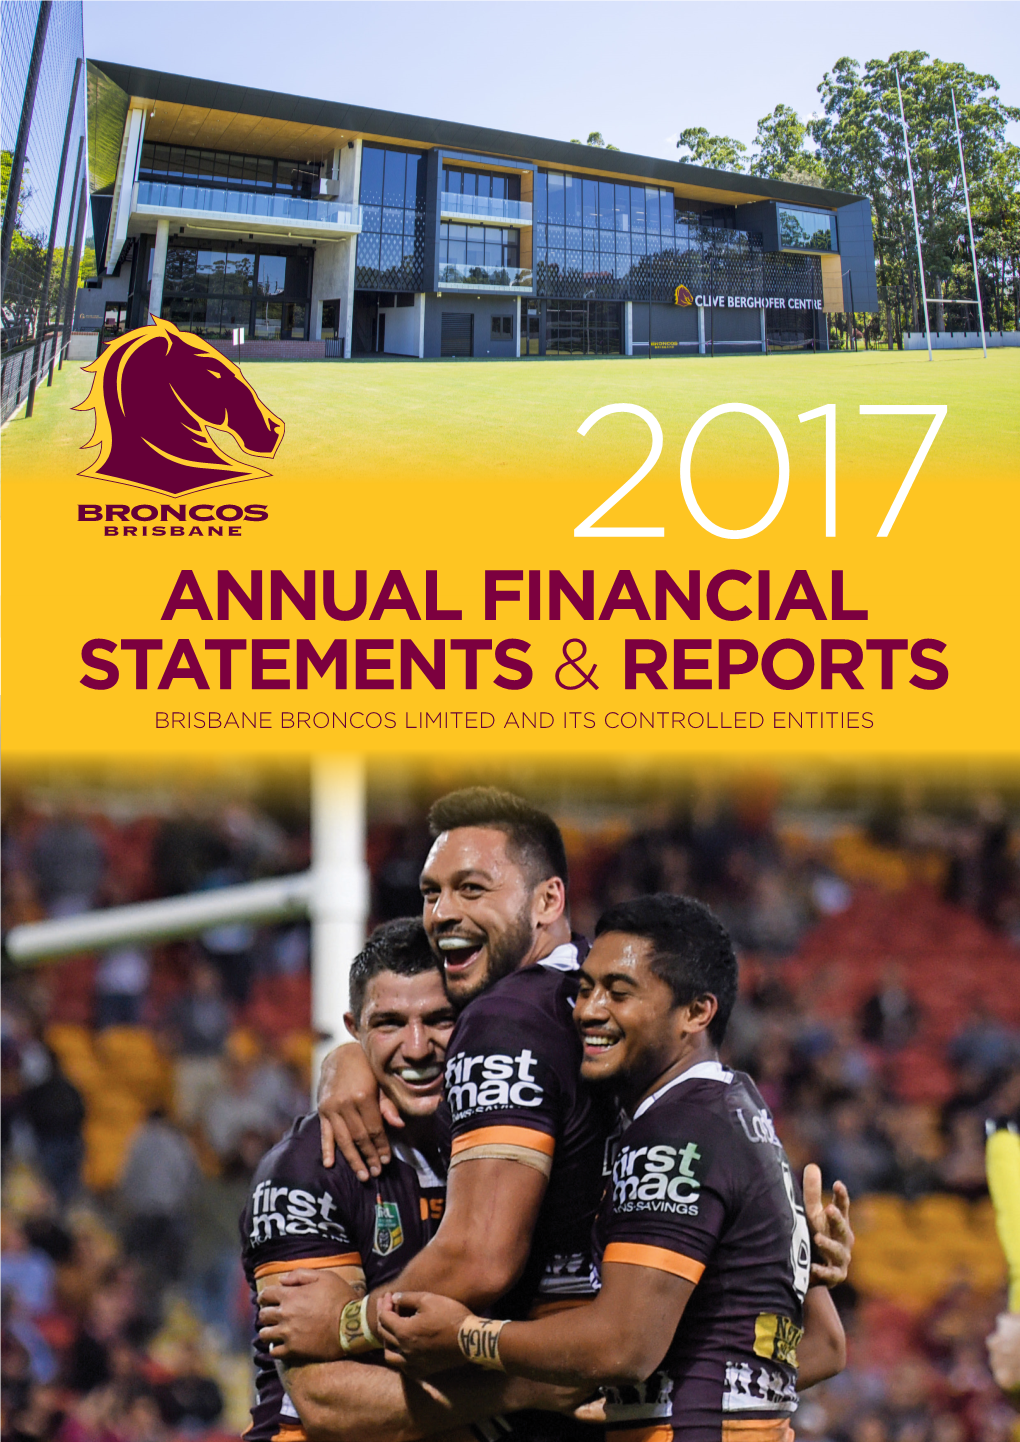 Annual Financial Statements & Reports